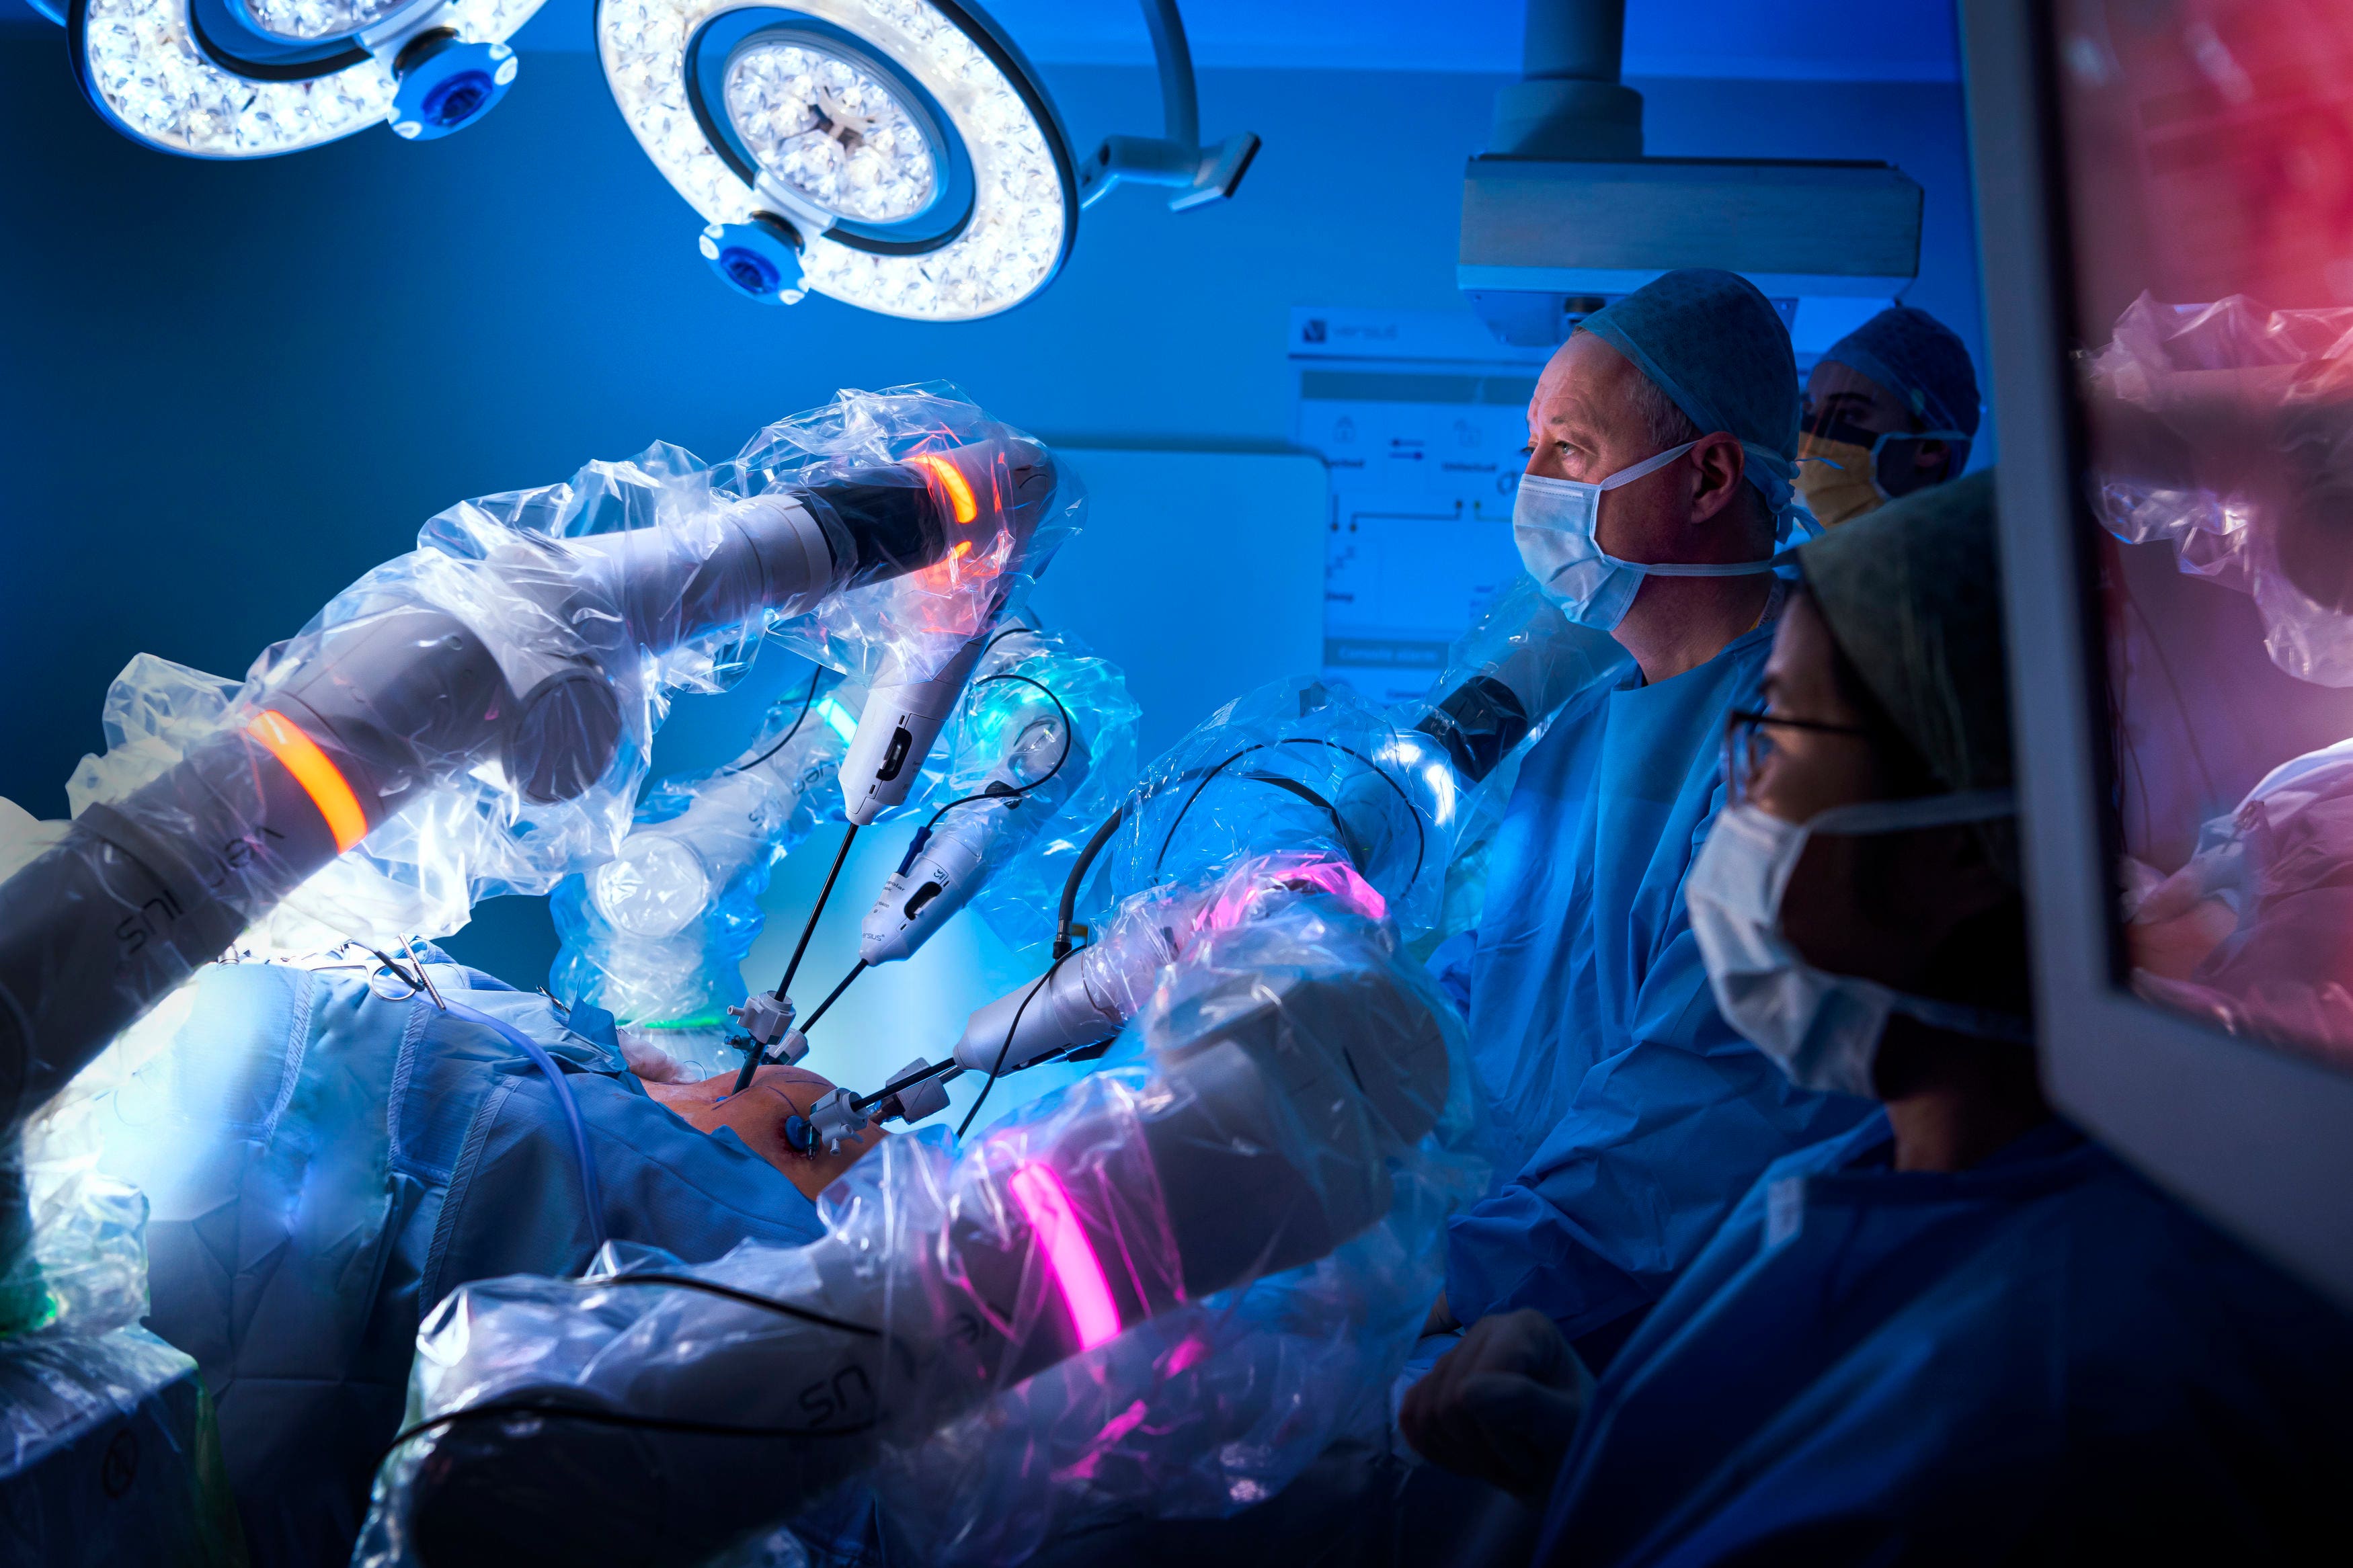 Robotic surgery is one of the areas of advancement when it comes to cancer treatment